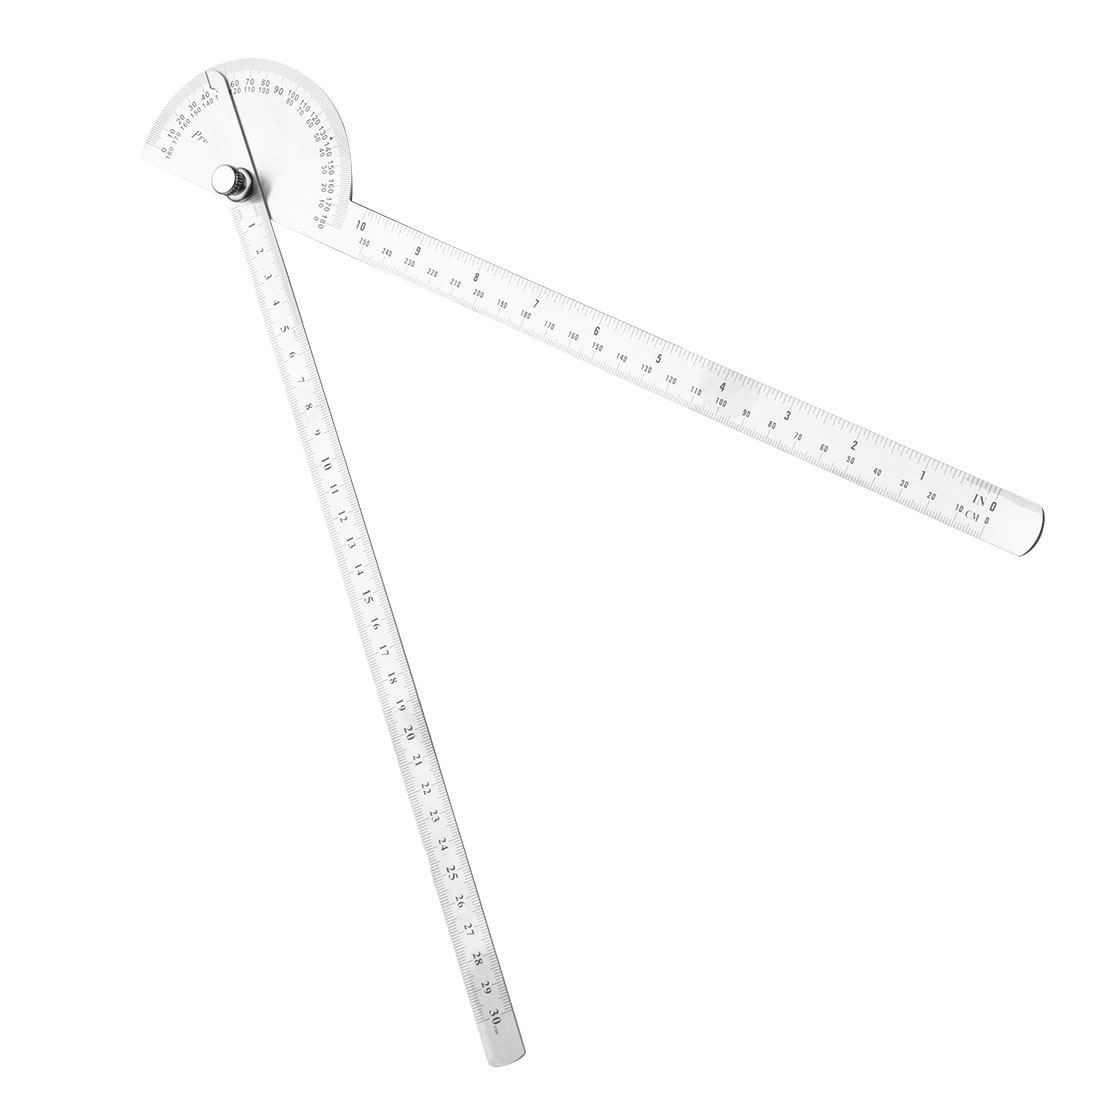 2*30cm Stainless Ruler Steel Protractor Round Head Angle 180 Degrees Rotation for Handymen or Builders P25